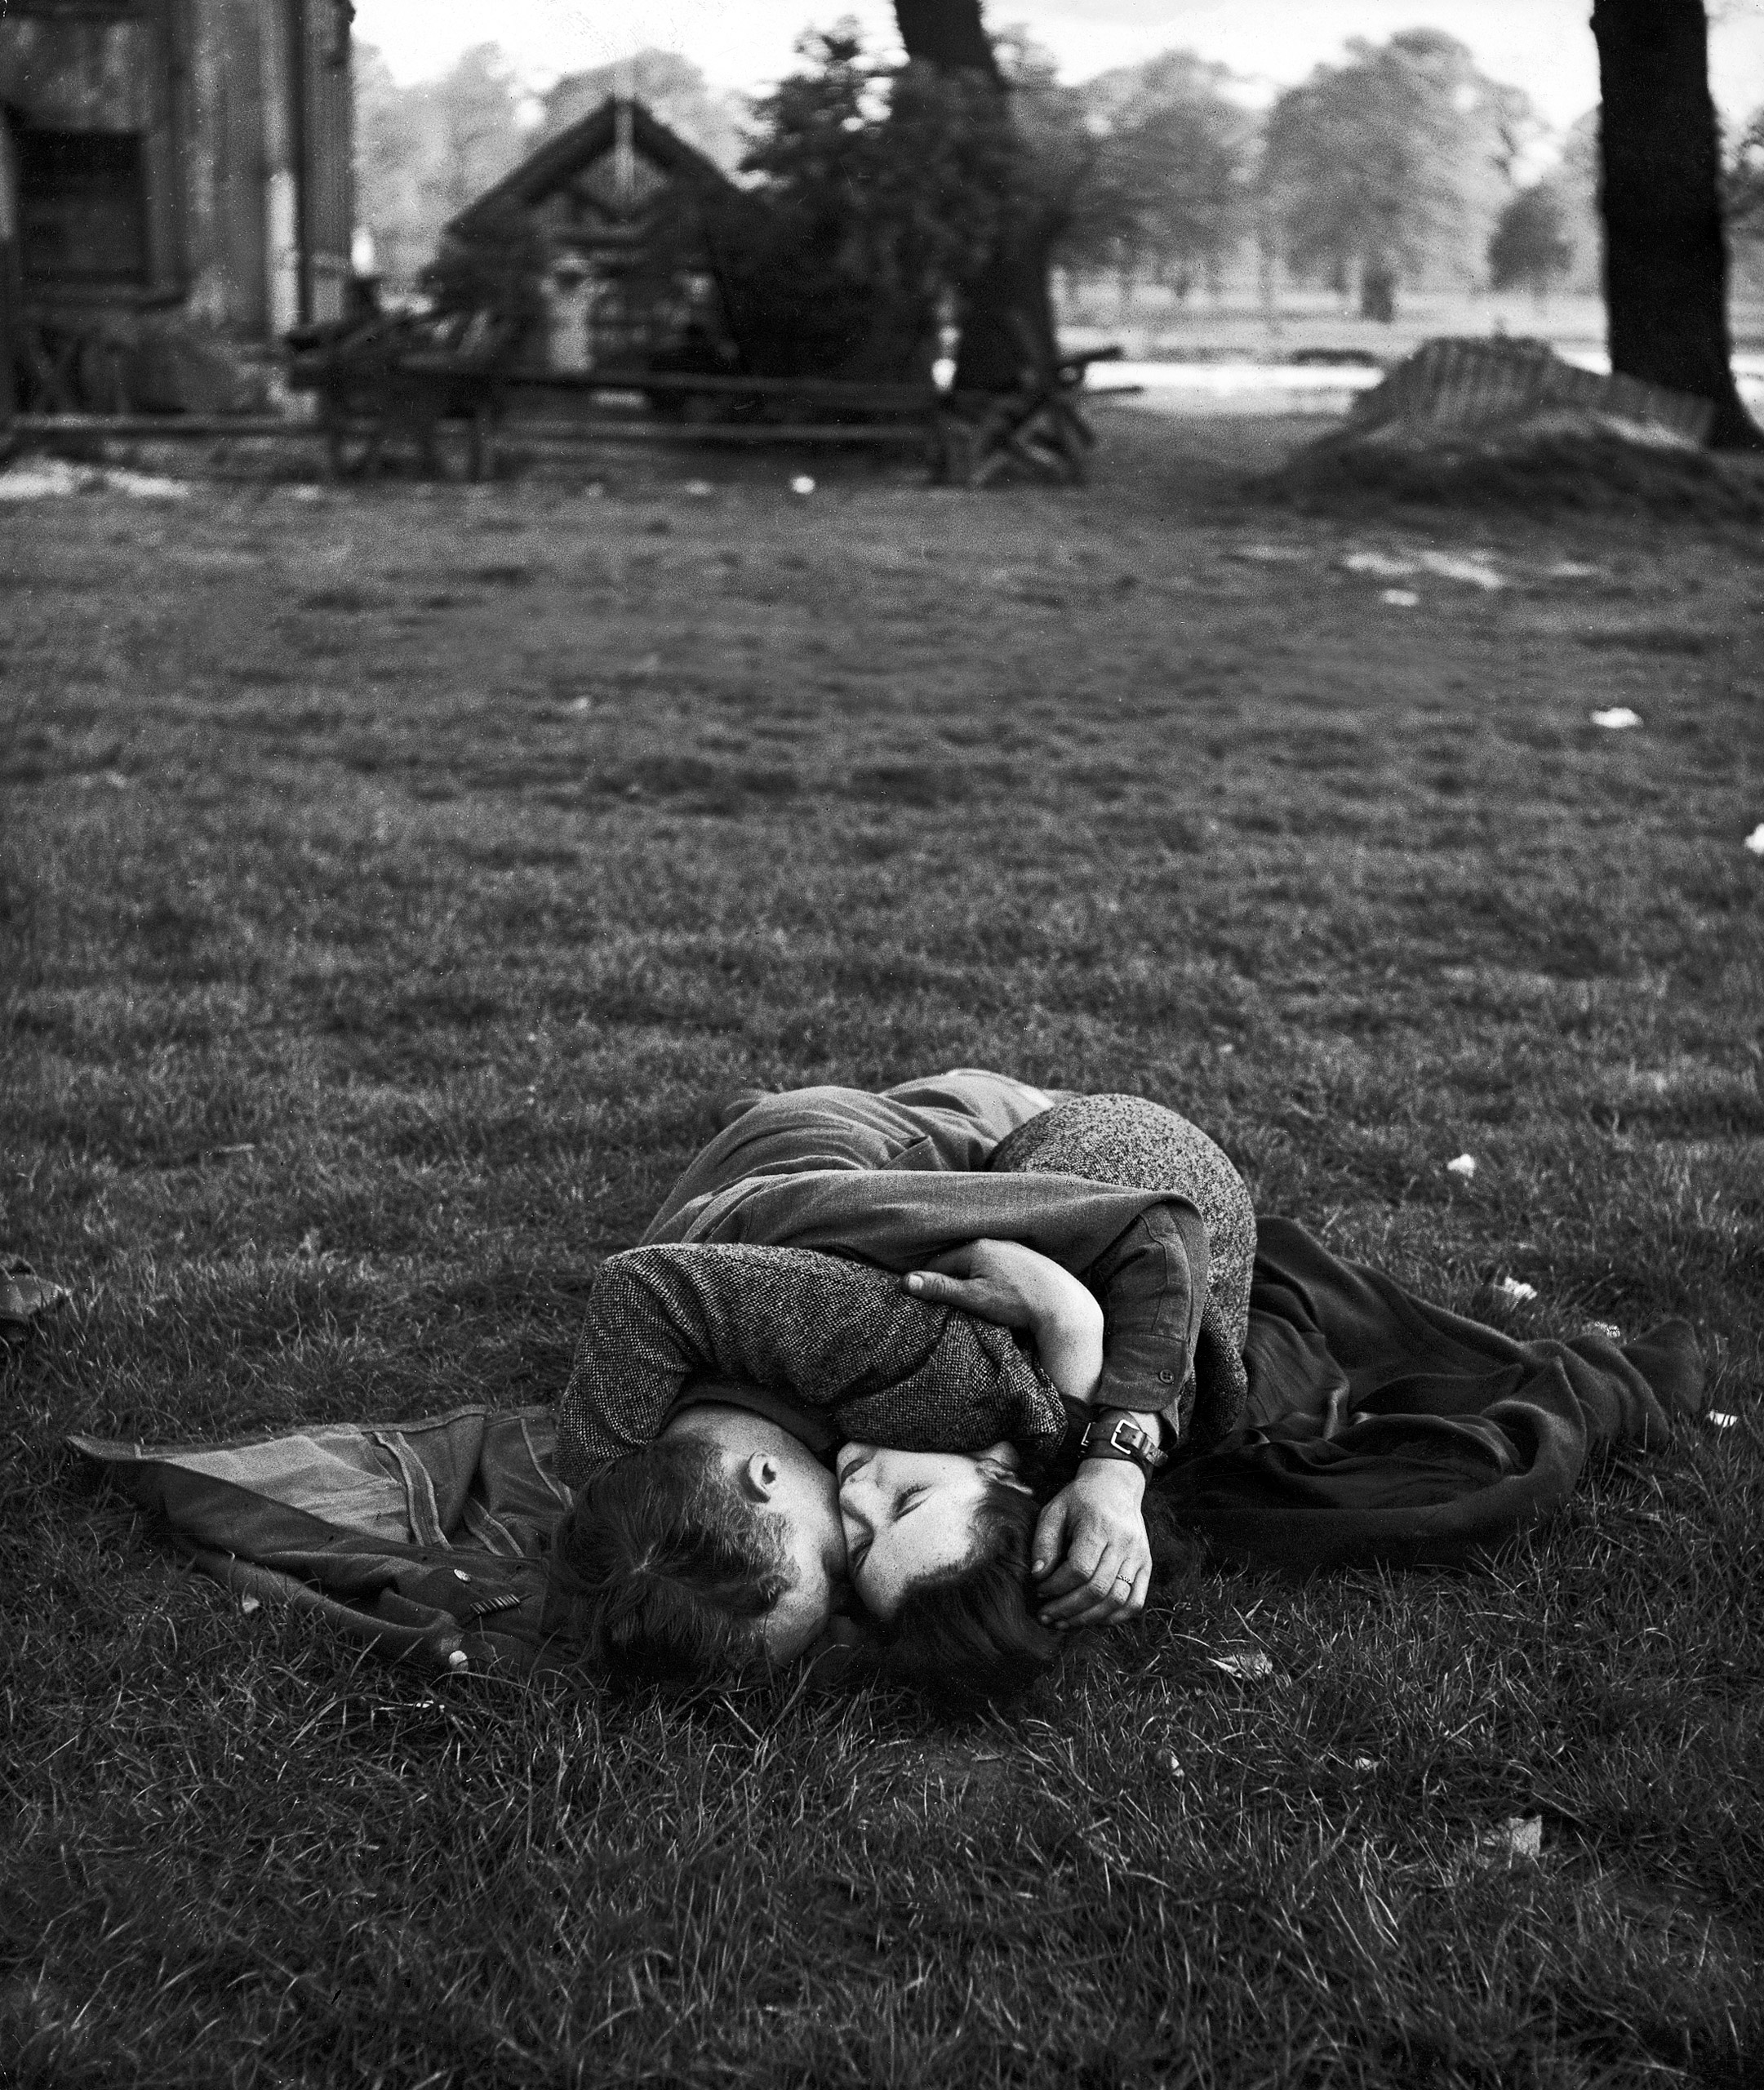 American soldier kissing his English girlfriend on lawn in Hyde Park, one of the favorite haunts of US troops stationed in England.